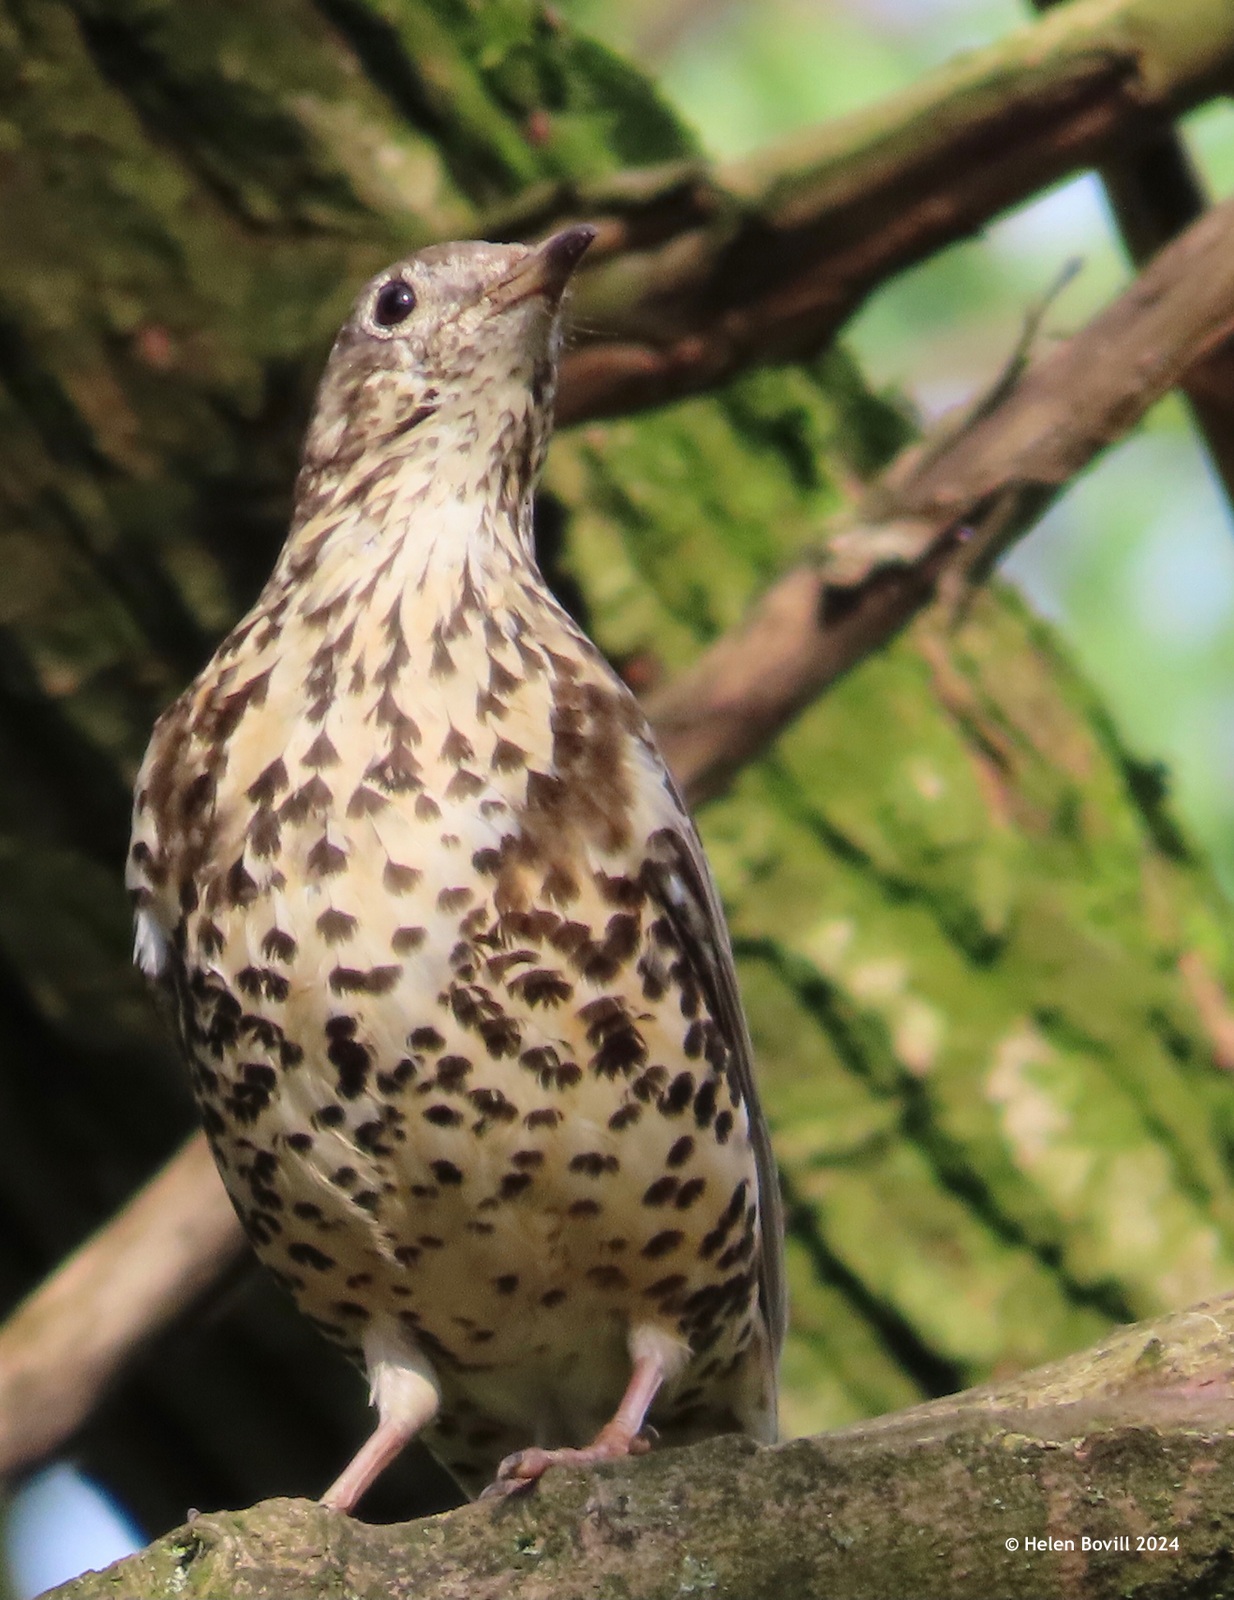 A mistle thrush high up in a tree